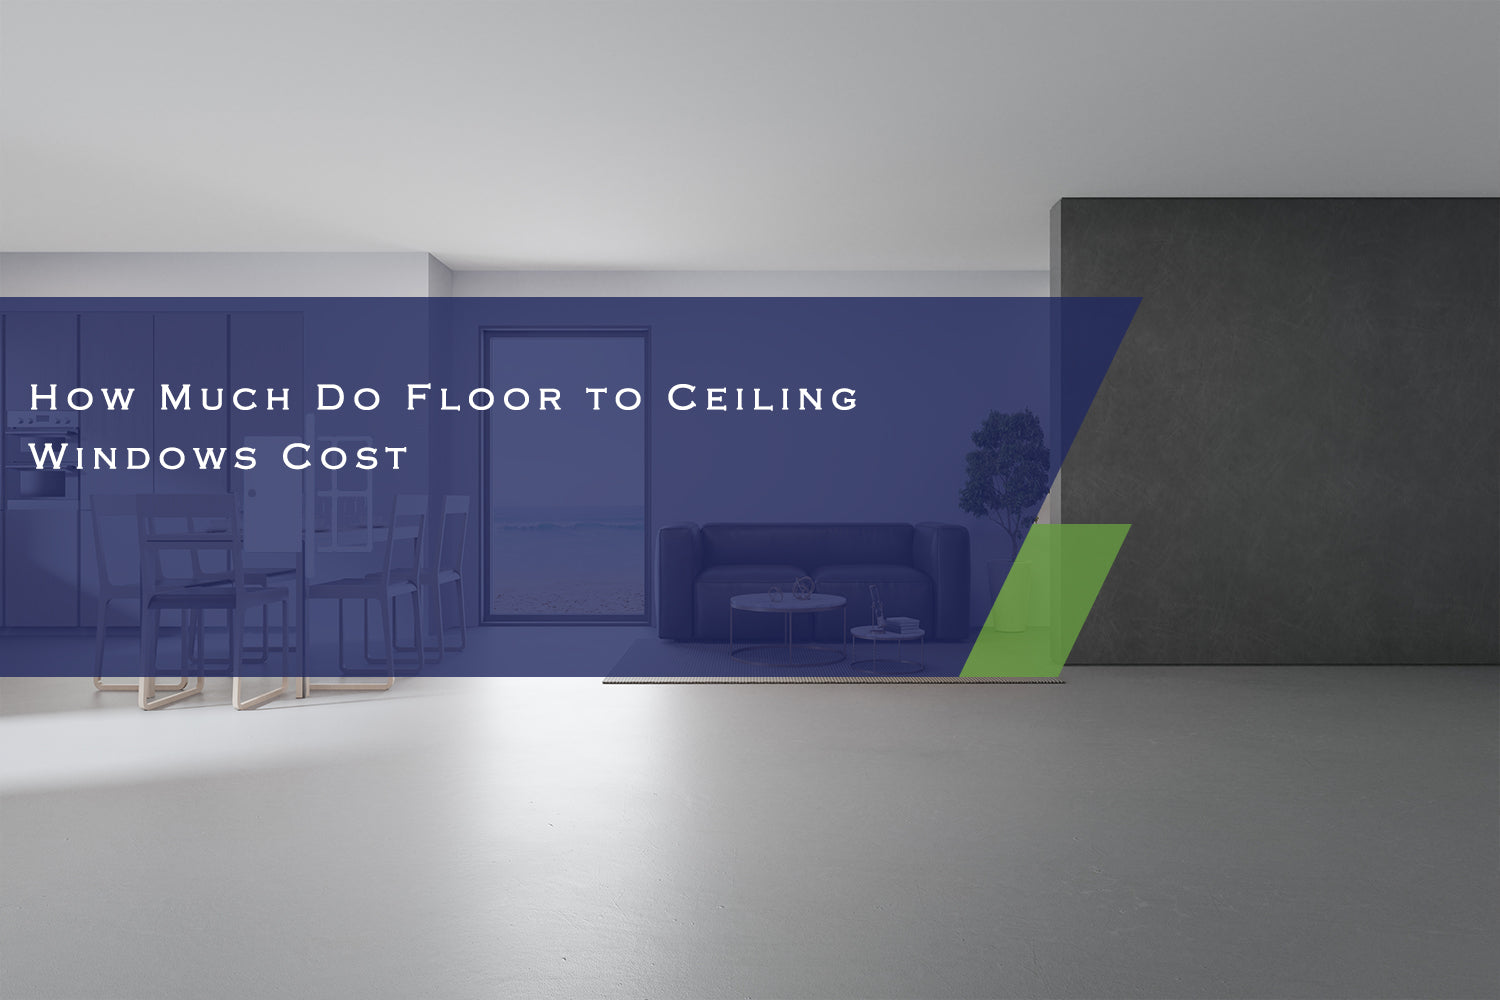 How Much Do Floor-to-Ceiling Windows Cost